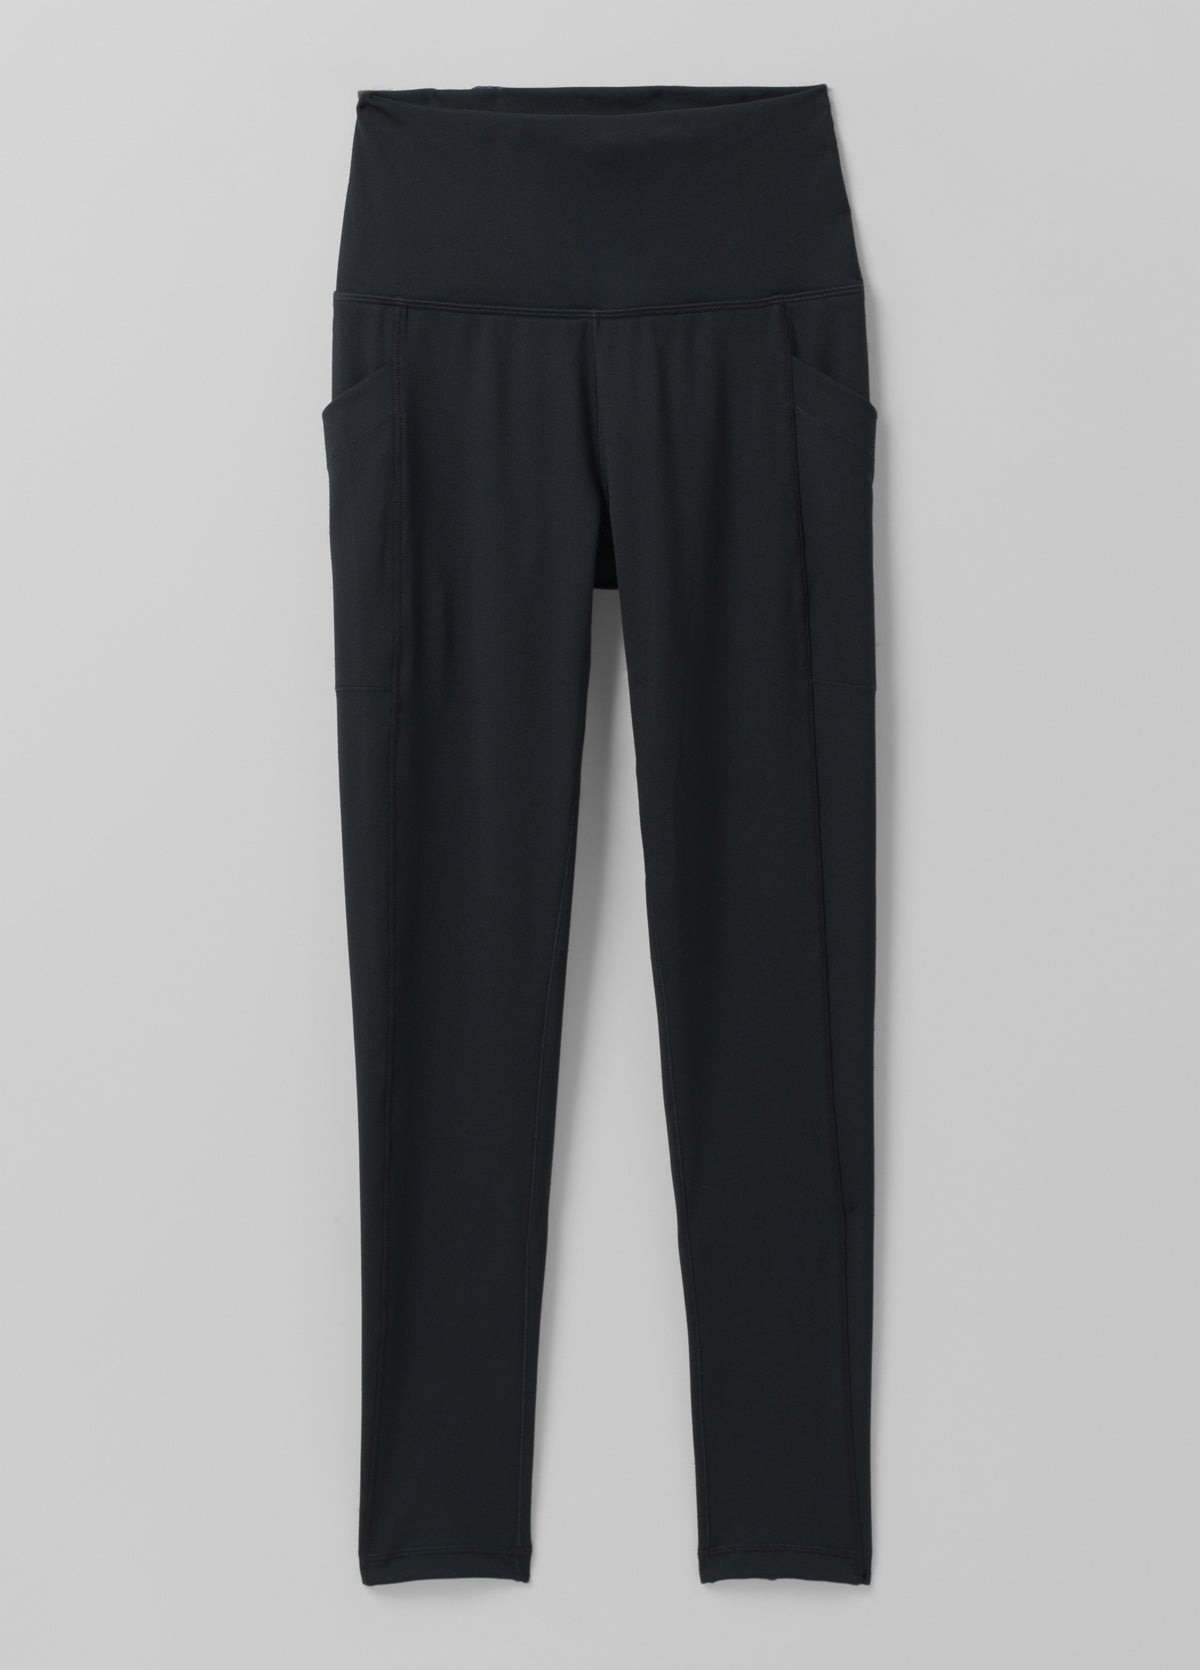 prAna - I live in the Becksa fit because they're so comfortable and cute!  I love the pocket feature in the leggings, plus the textured fabric makes  these my go-to for multiple